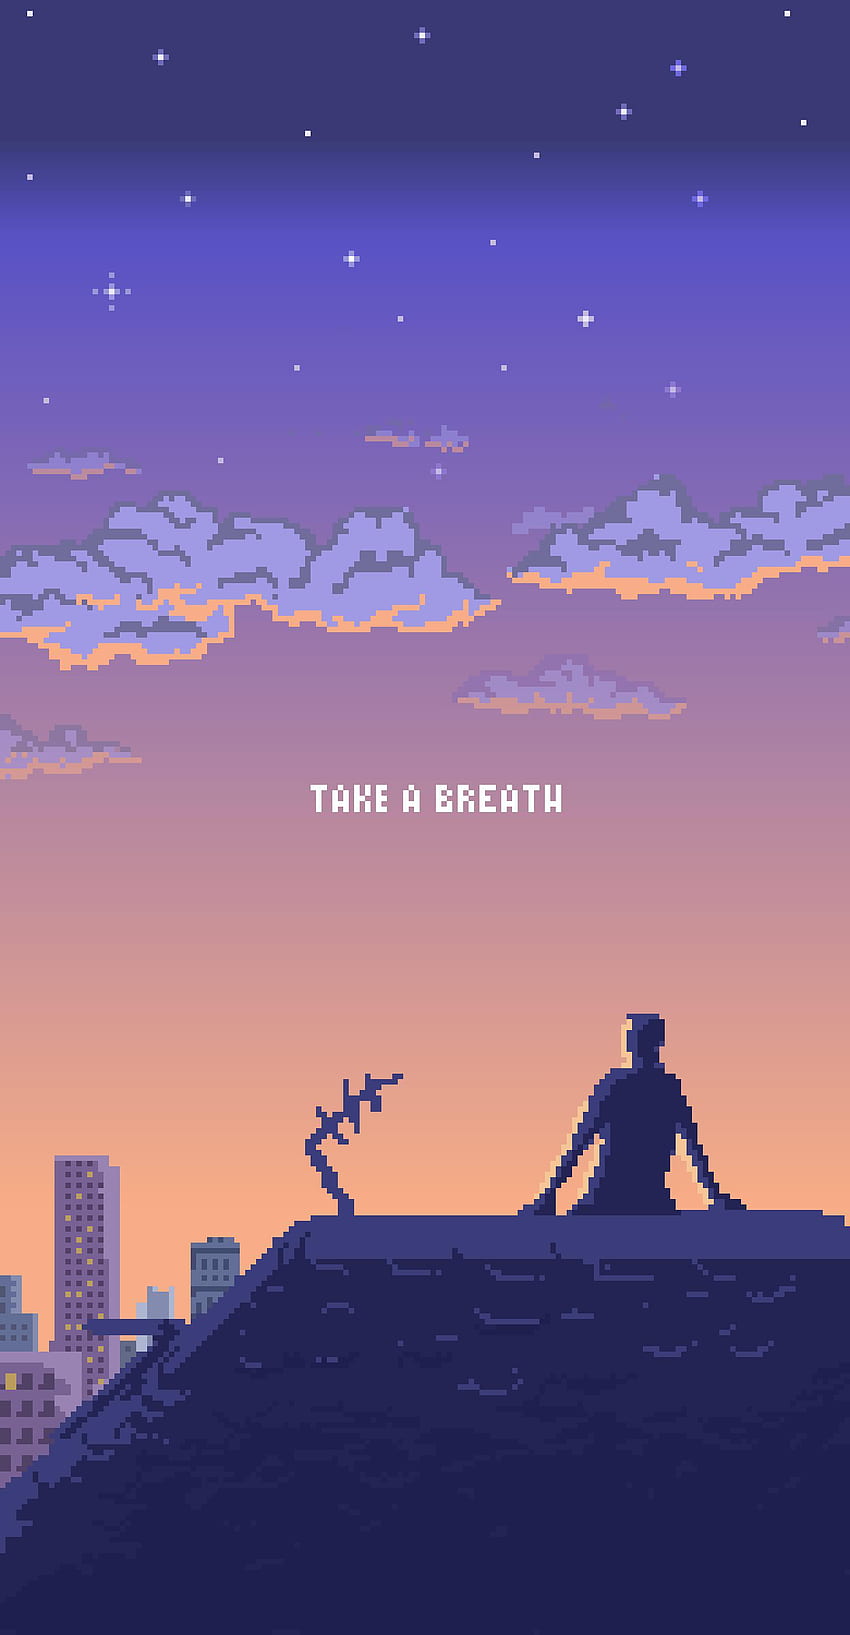 Back with more lofi pixel stuff! Feel to use as phone . Hope you all enjoy ✌️DM if wanting to use for song covers etc: lofi HD phone wallpaper